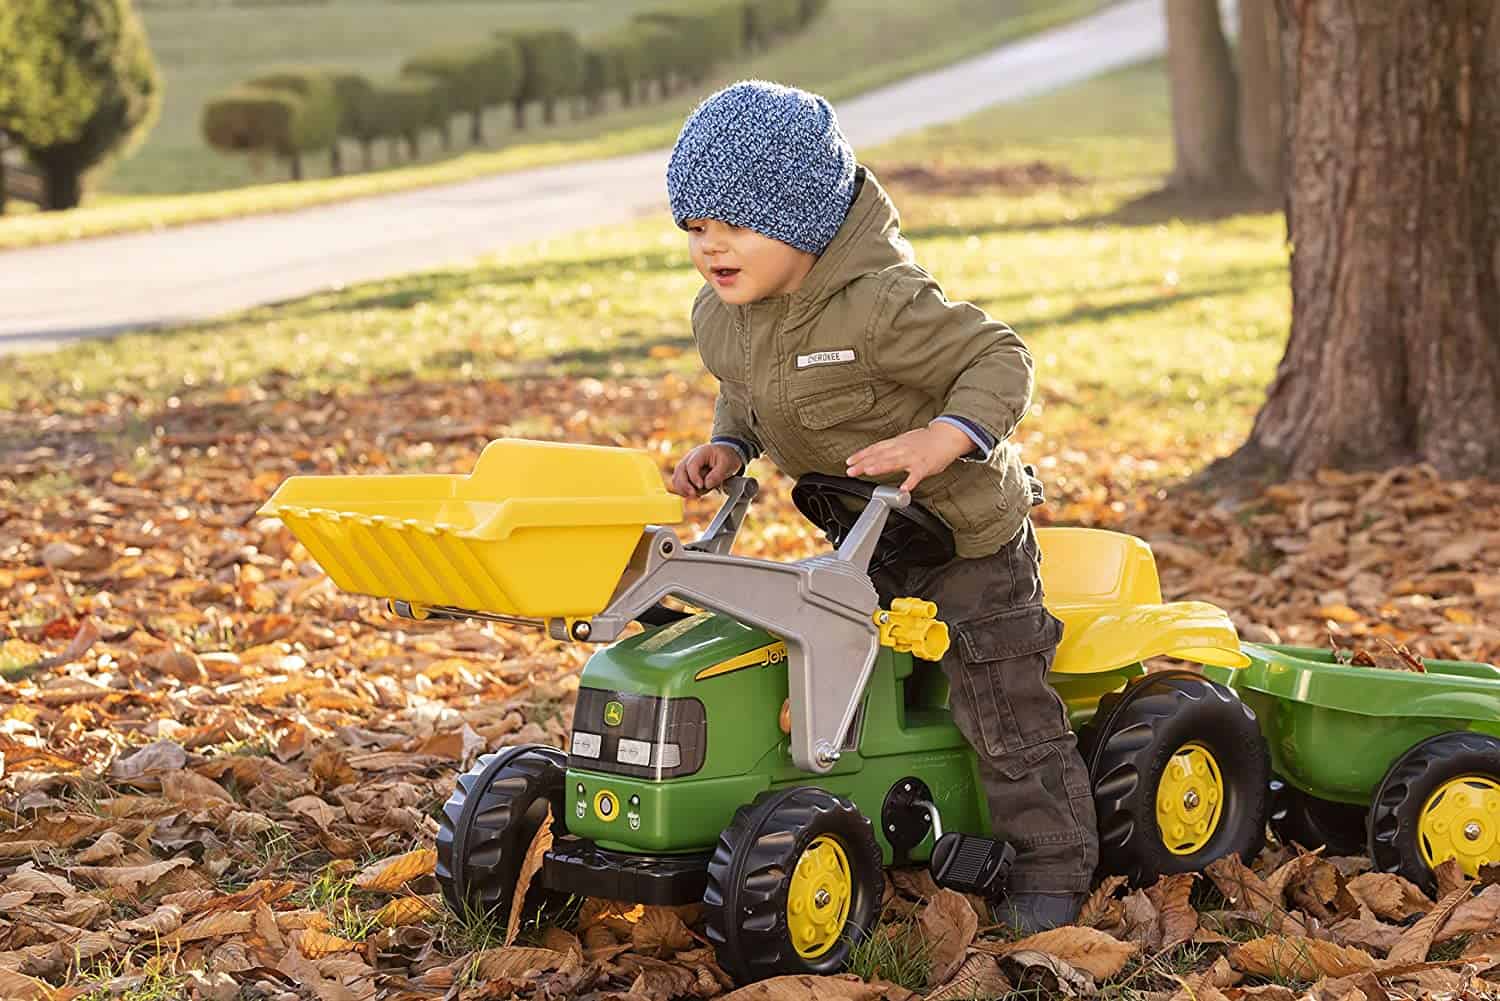 Overall best toy pedal tractor for toddlers: Rolly Toys rollyKid John Deere with trailer